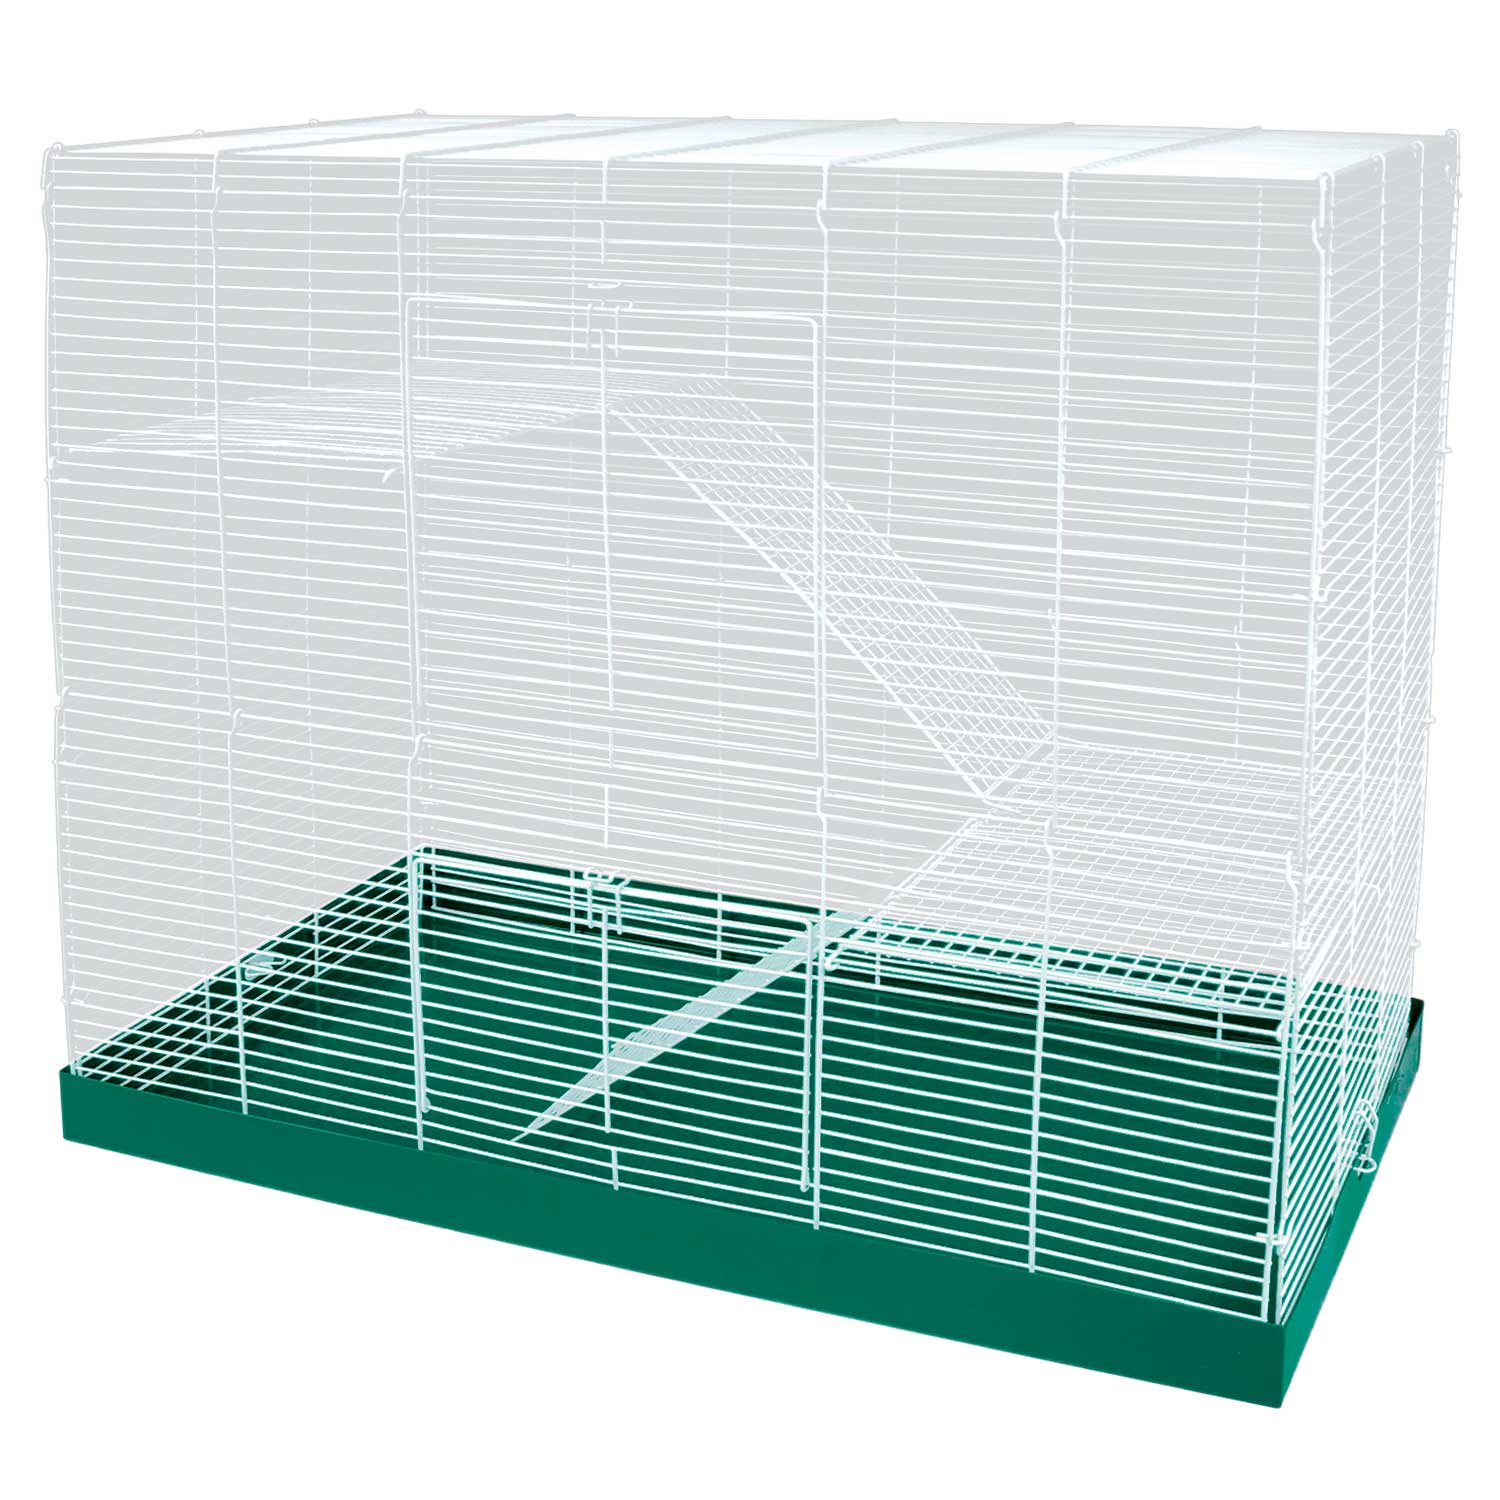 Ware Manufacturing Clean Living Cage 6.0 